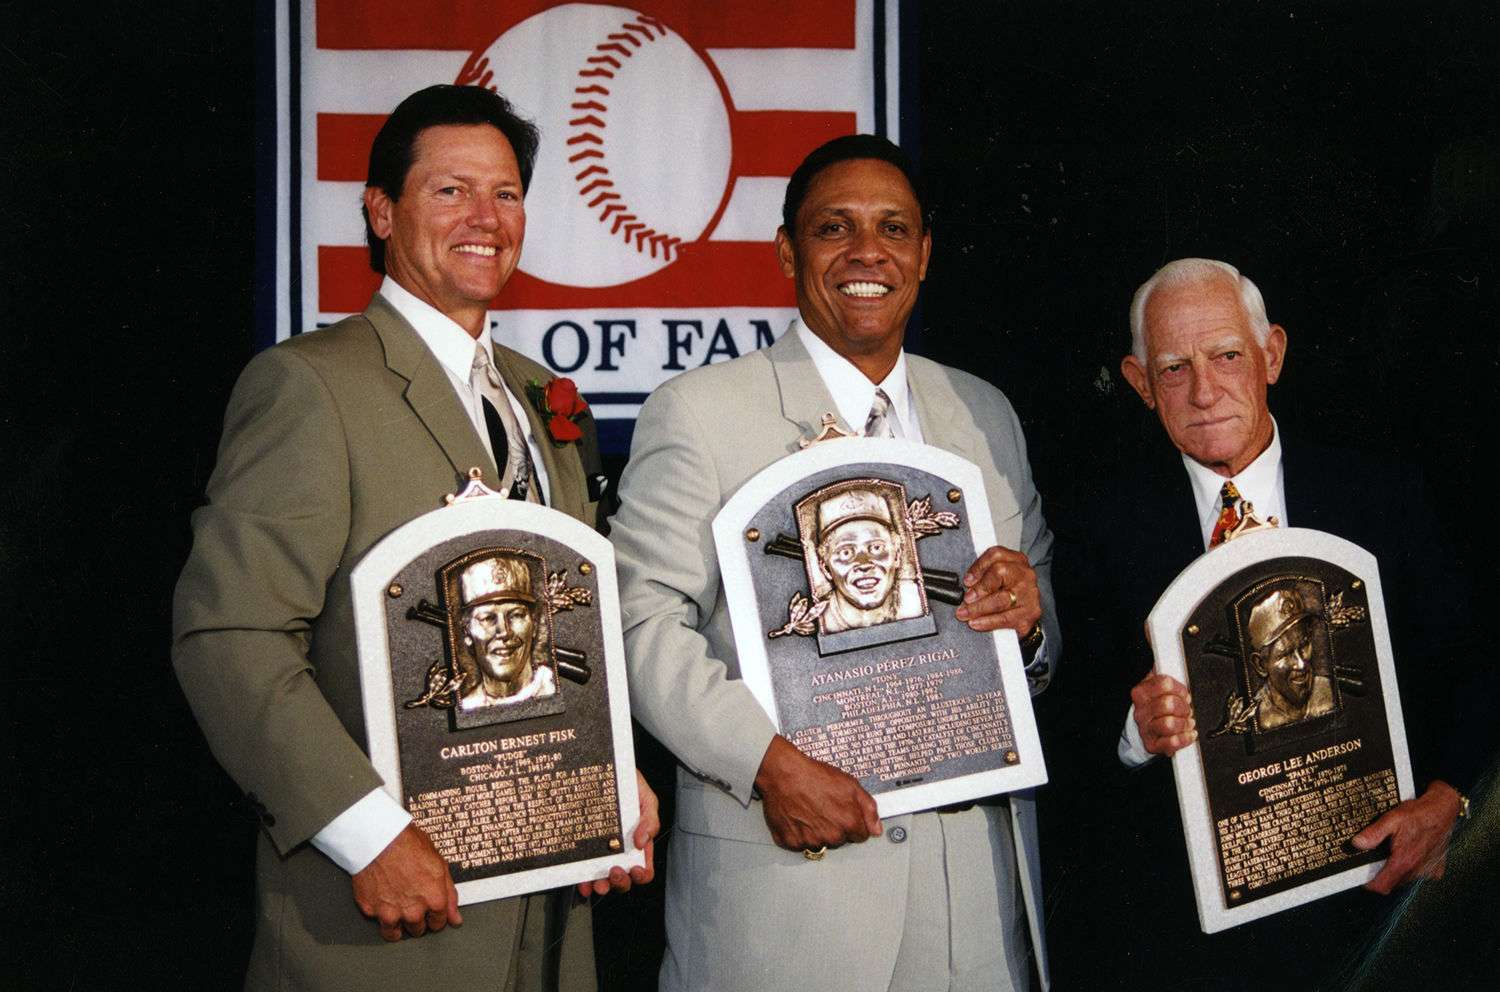 Tany Pérez (center) at the 2000 Hall of Fame ceremony. Photo: National Baseball Hall of Fame.